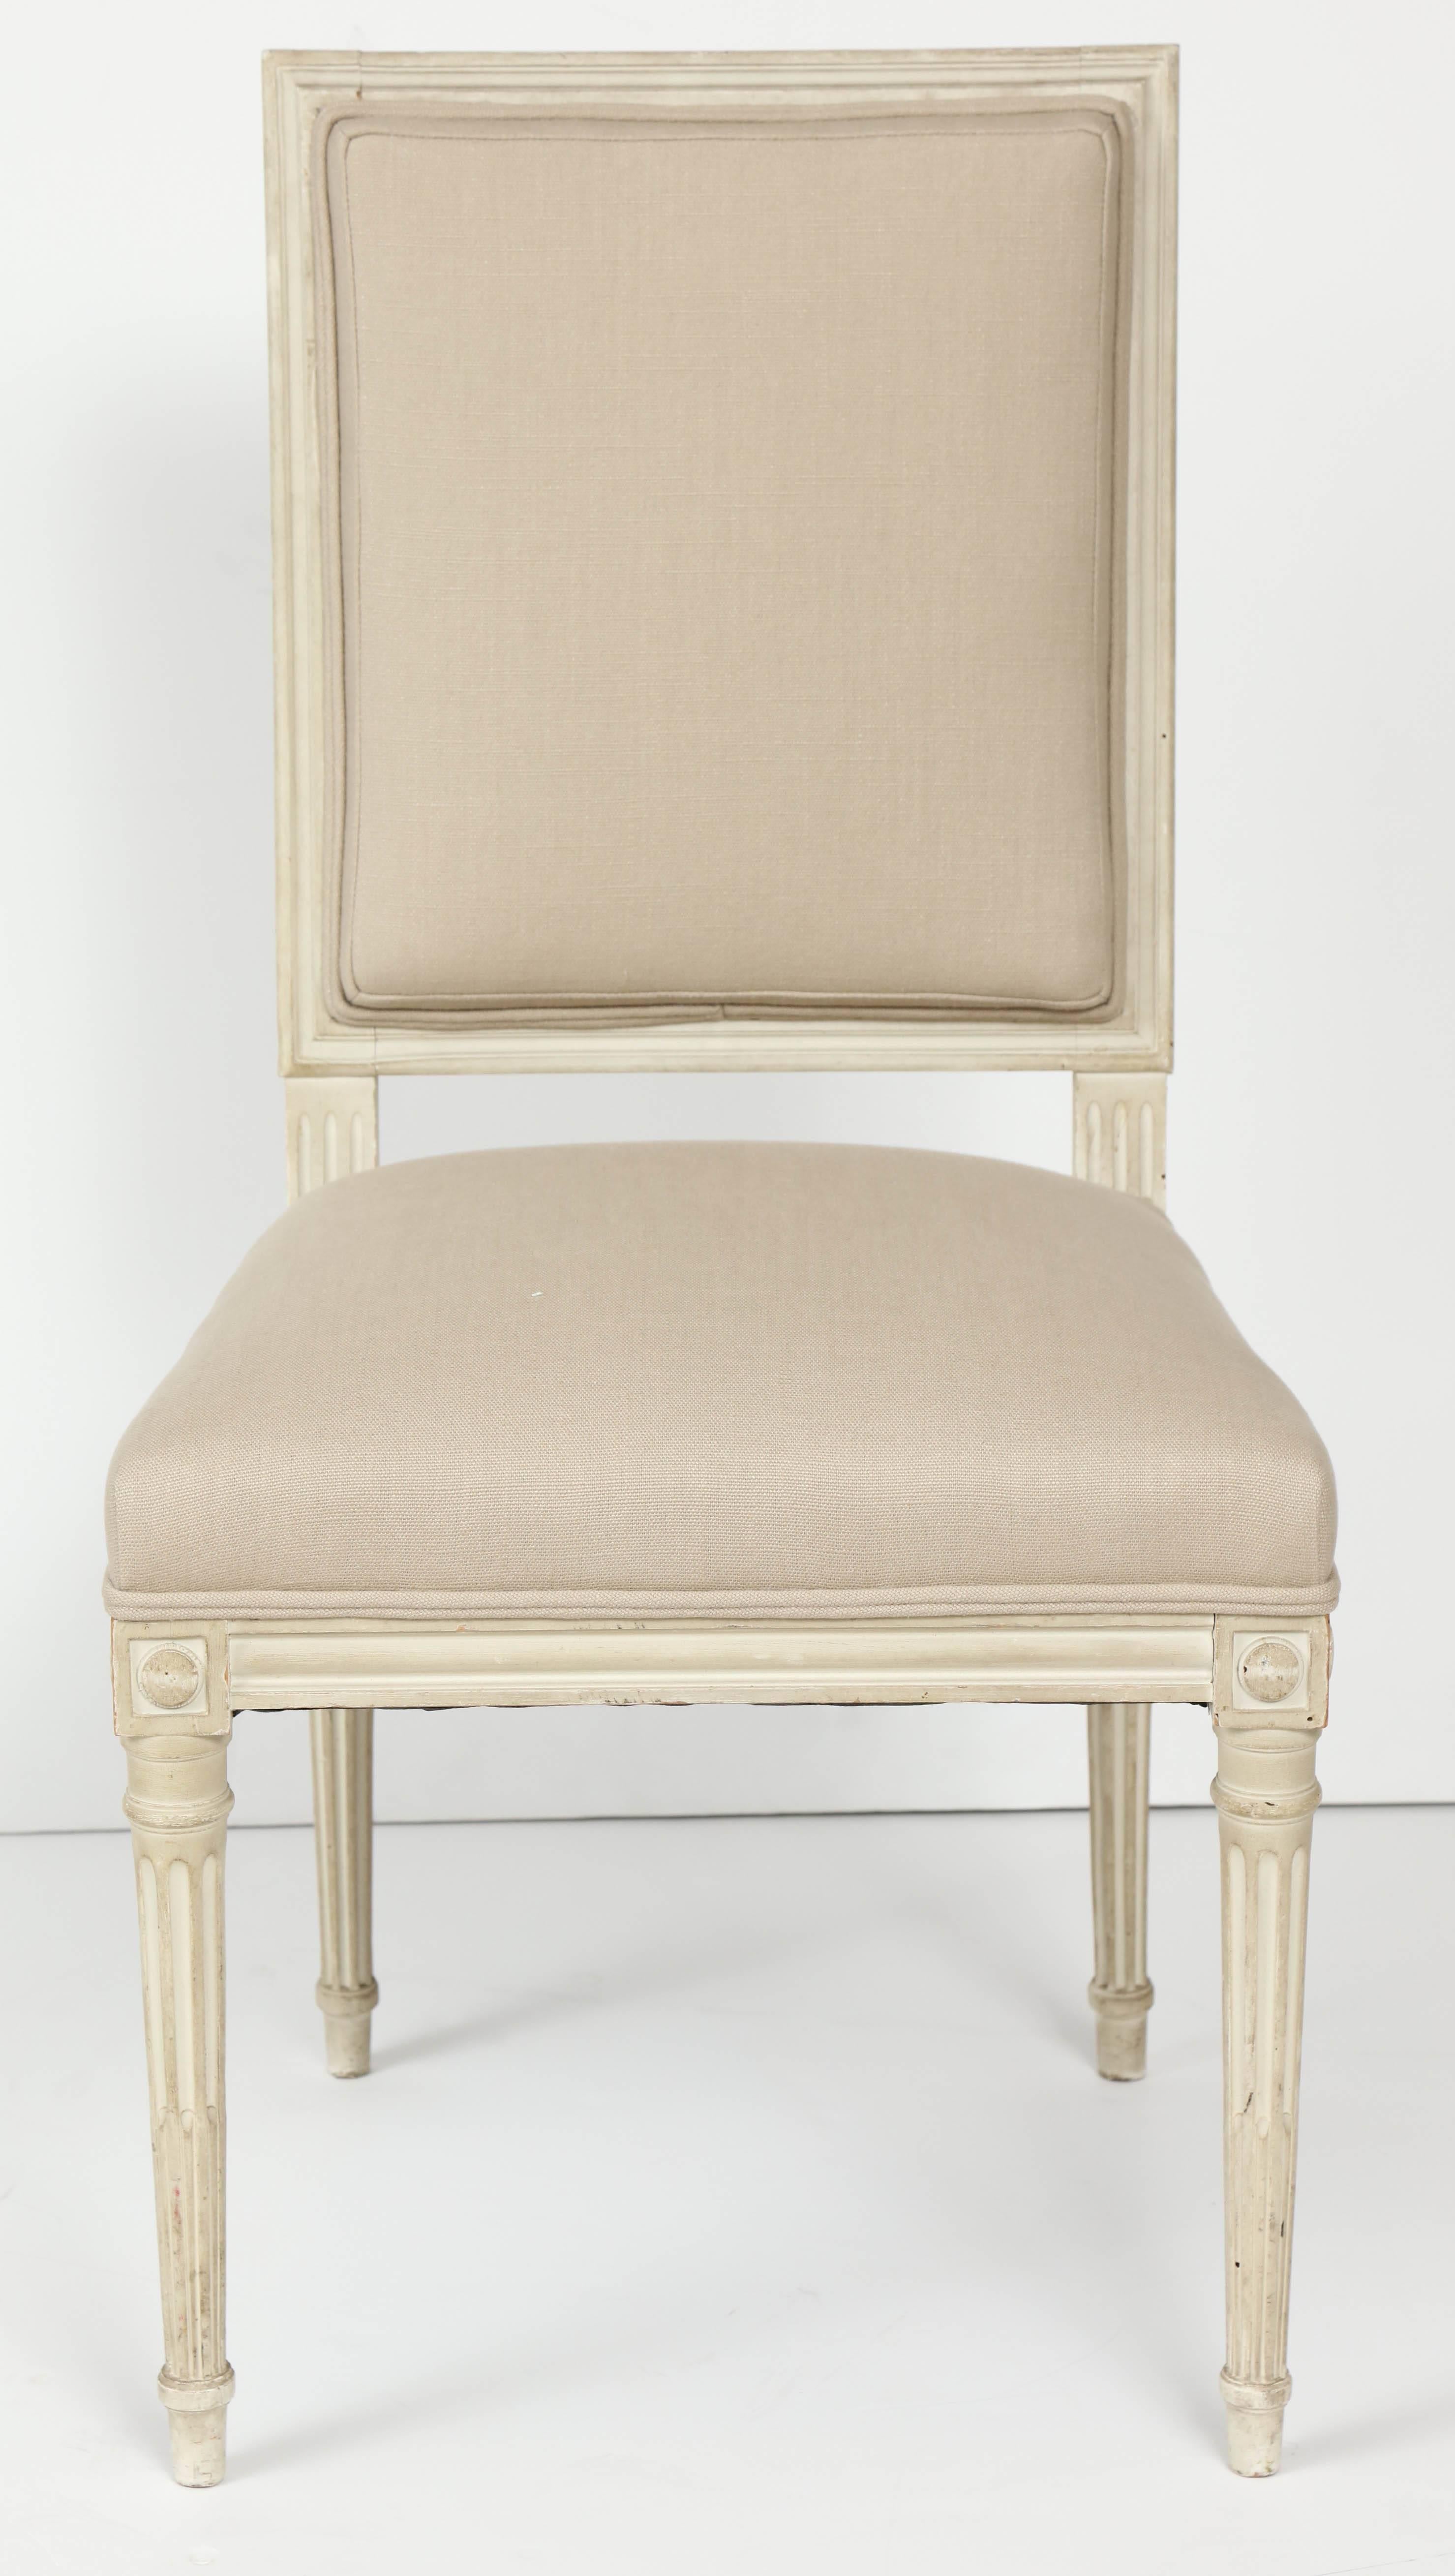 We love the understated elegance of these Louis XVI style painted dining chairs. Painted in a creamy white, the chairs display some of the lovely details characteristic of the Louis XVI style--square back and square seat, reeded, tapered legs and a